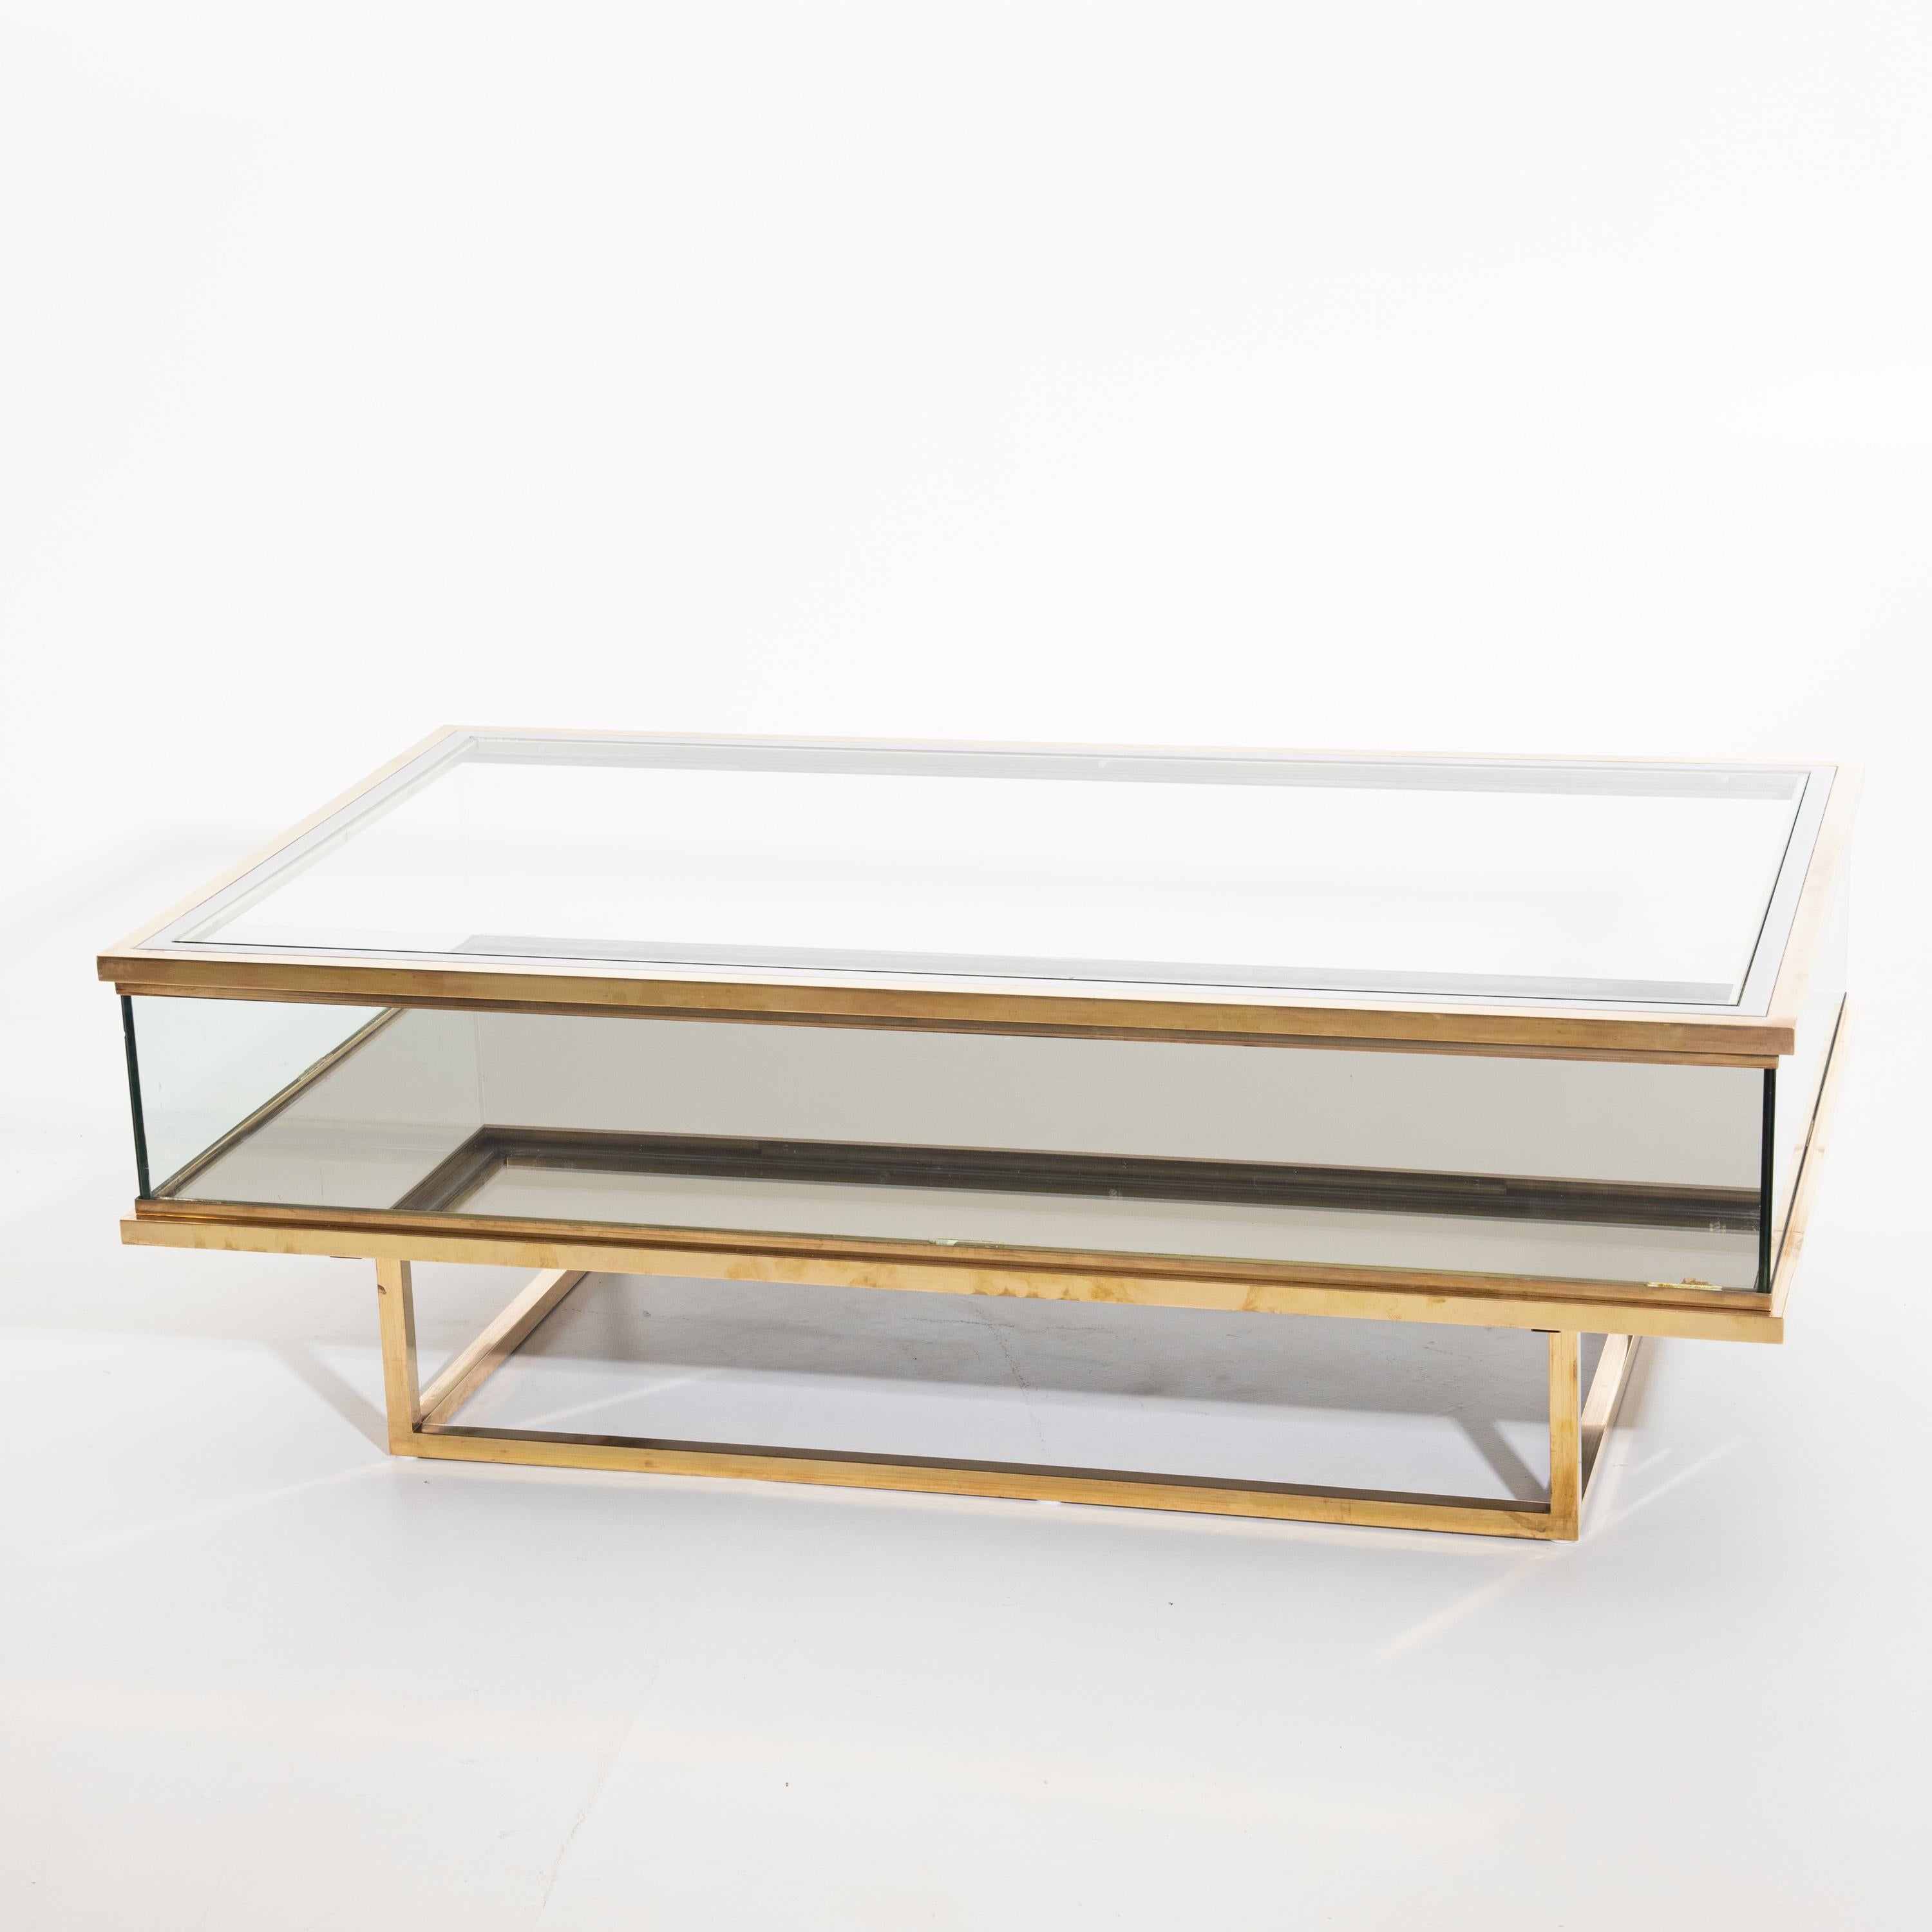 Large rectangular coffee table by Maison Jansen in the 1970s. Made of brass and glass with a sliding top.
    